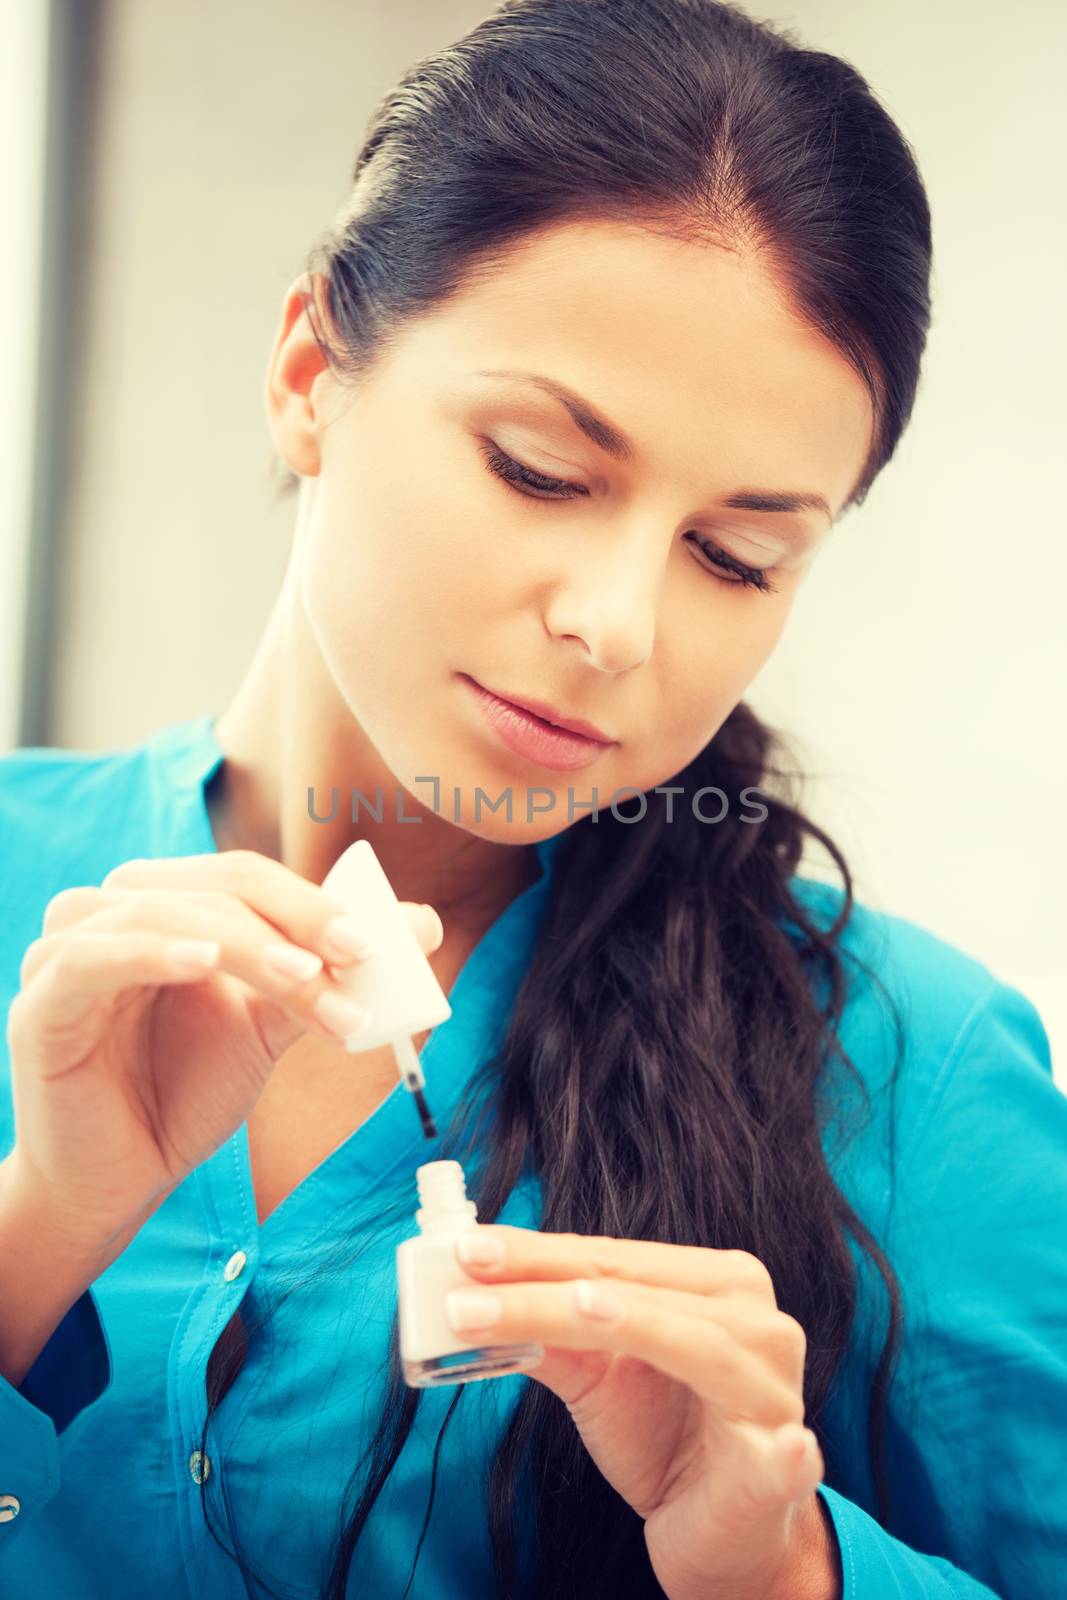 picture of beautiful woman polishing her nails